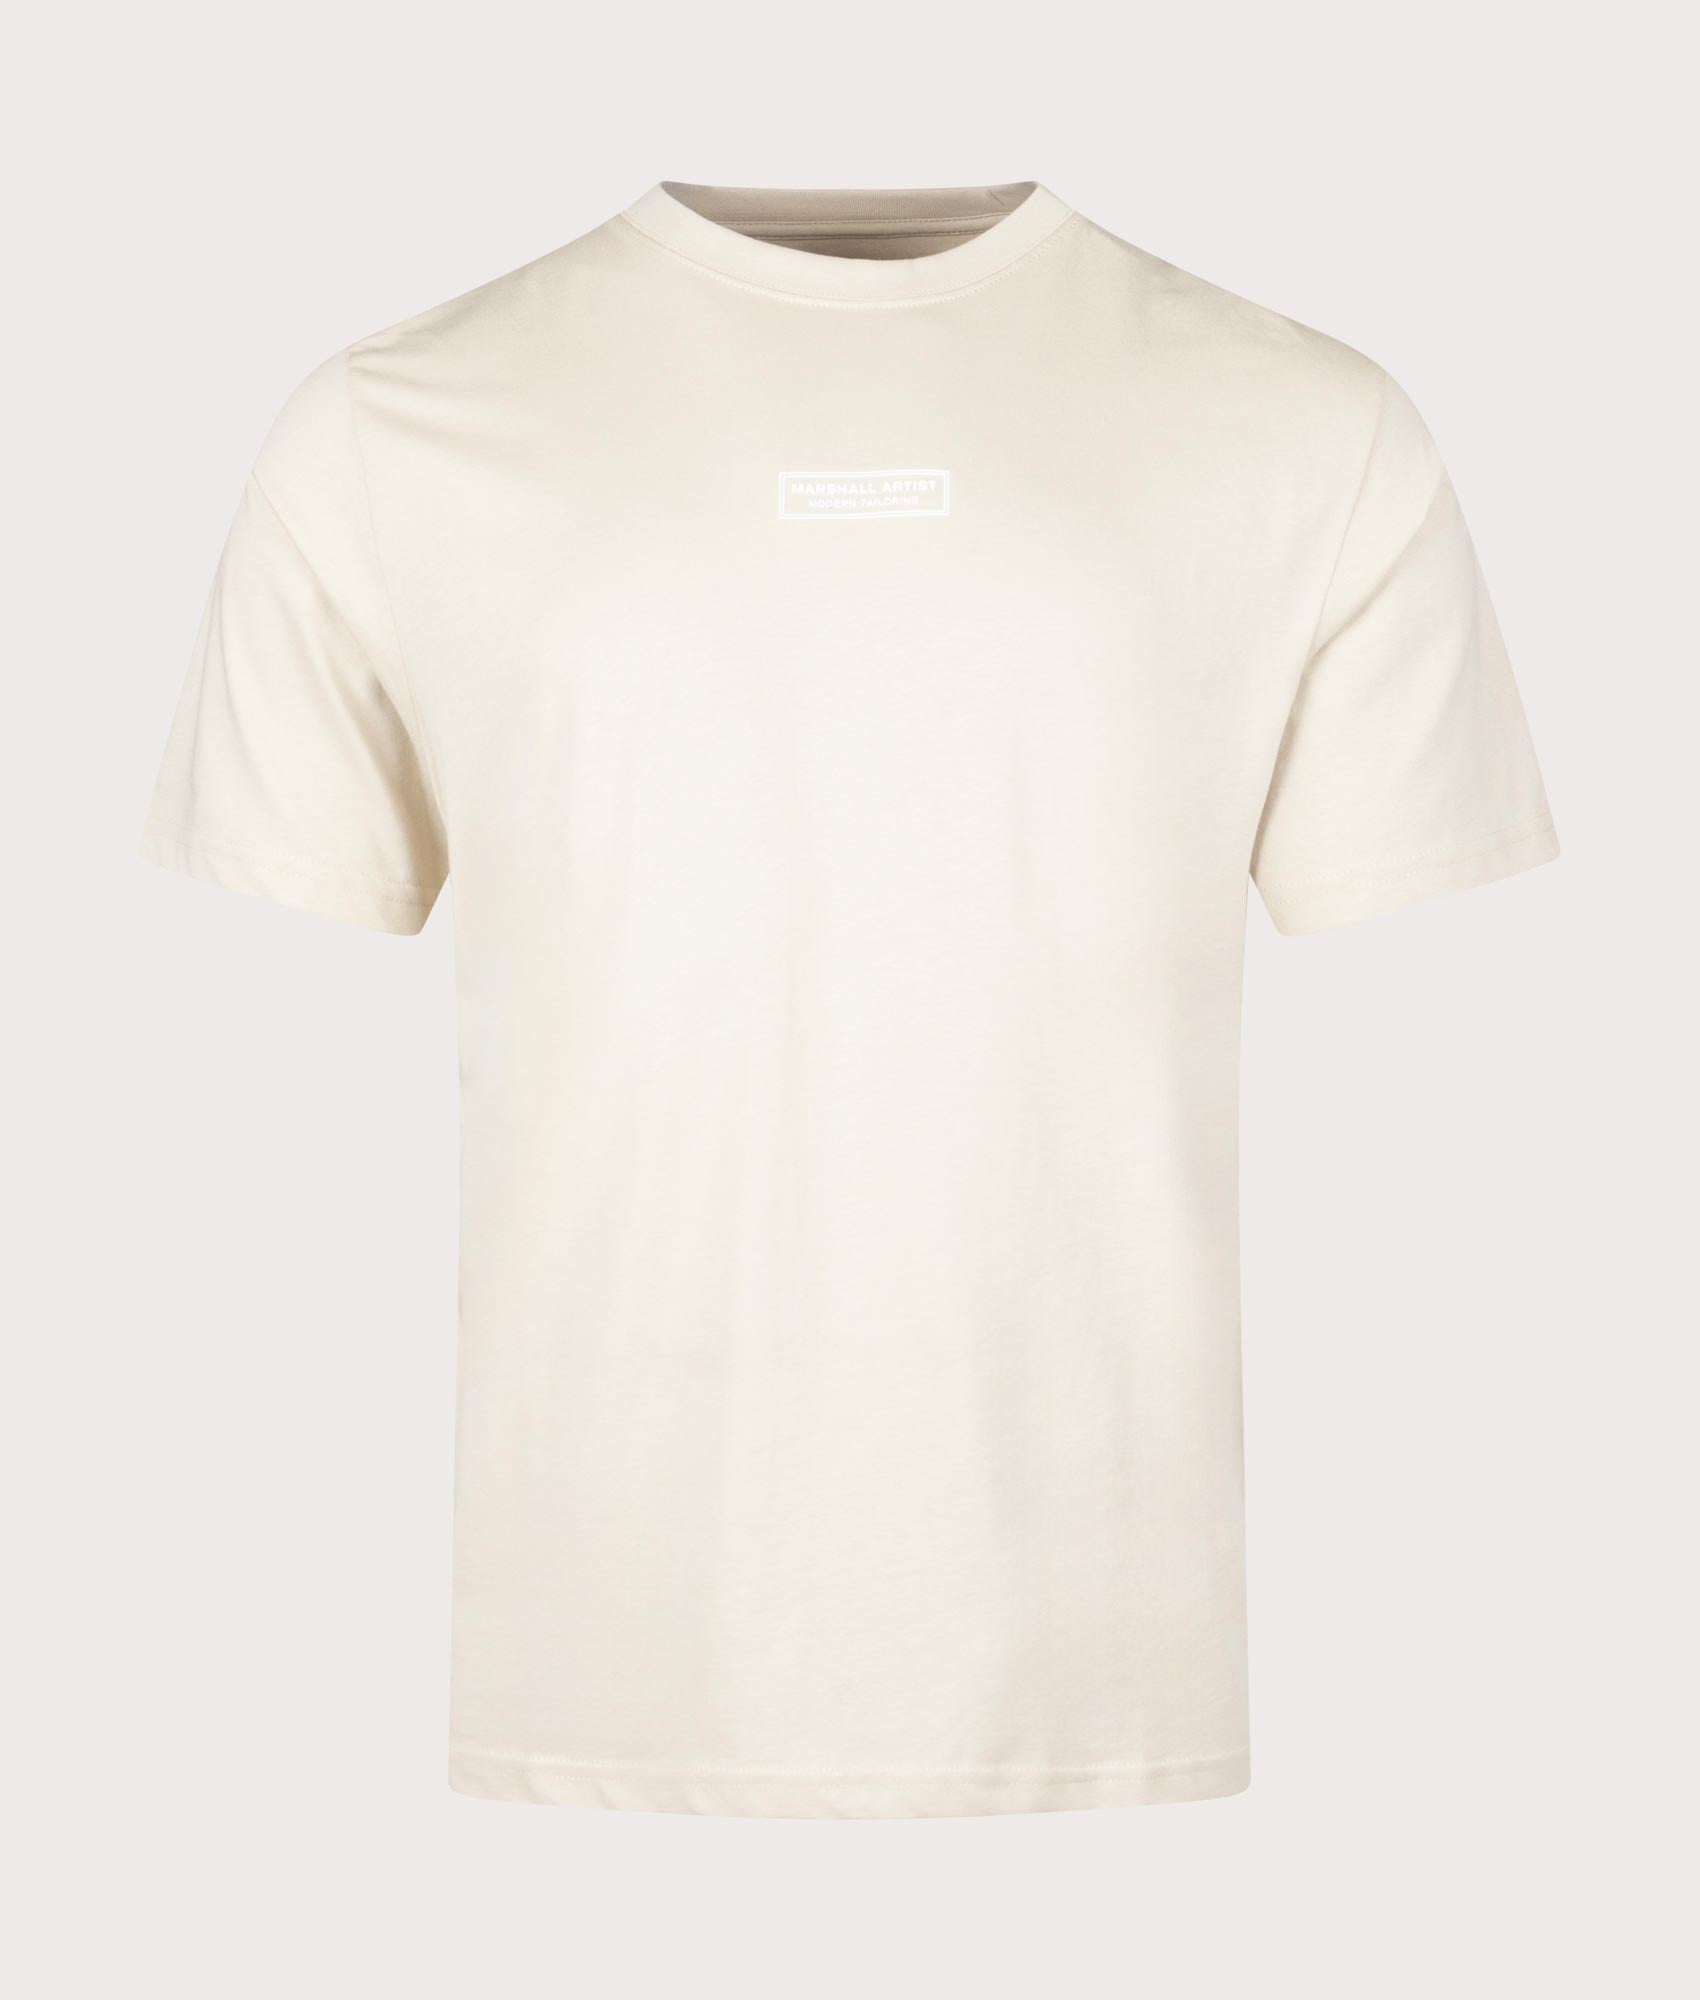 Marshall Artist Mens Injection T-Shirt - Colour: 010 Sandstone - Size: Small